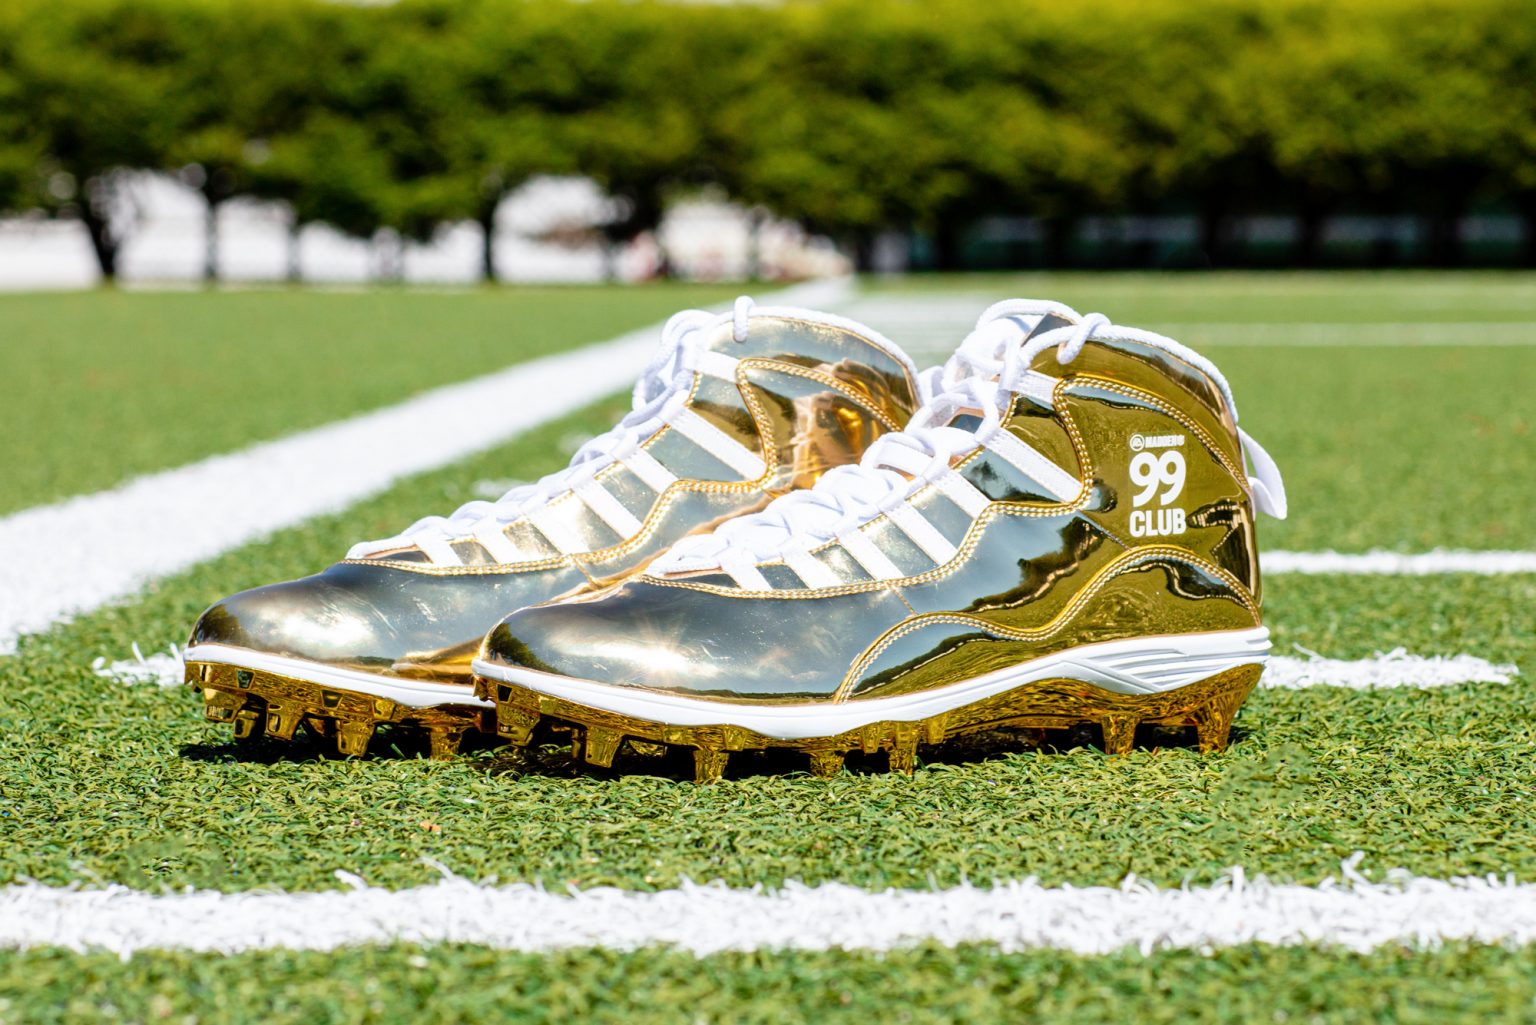 Check Out The Air Jordan 10 PE Cleats Made Exclusively For The Madden